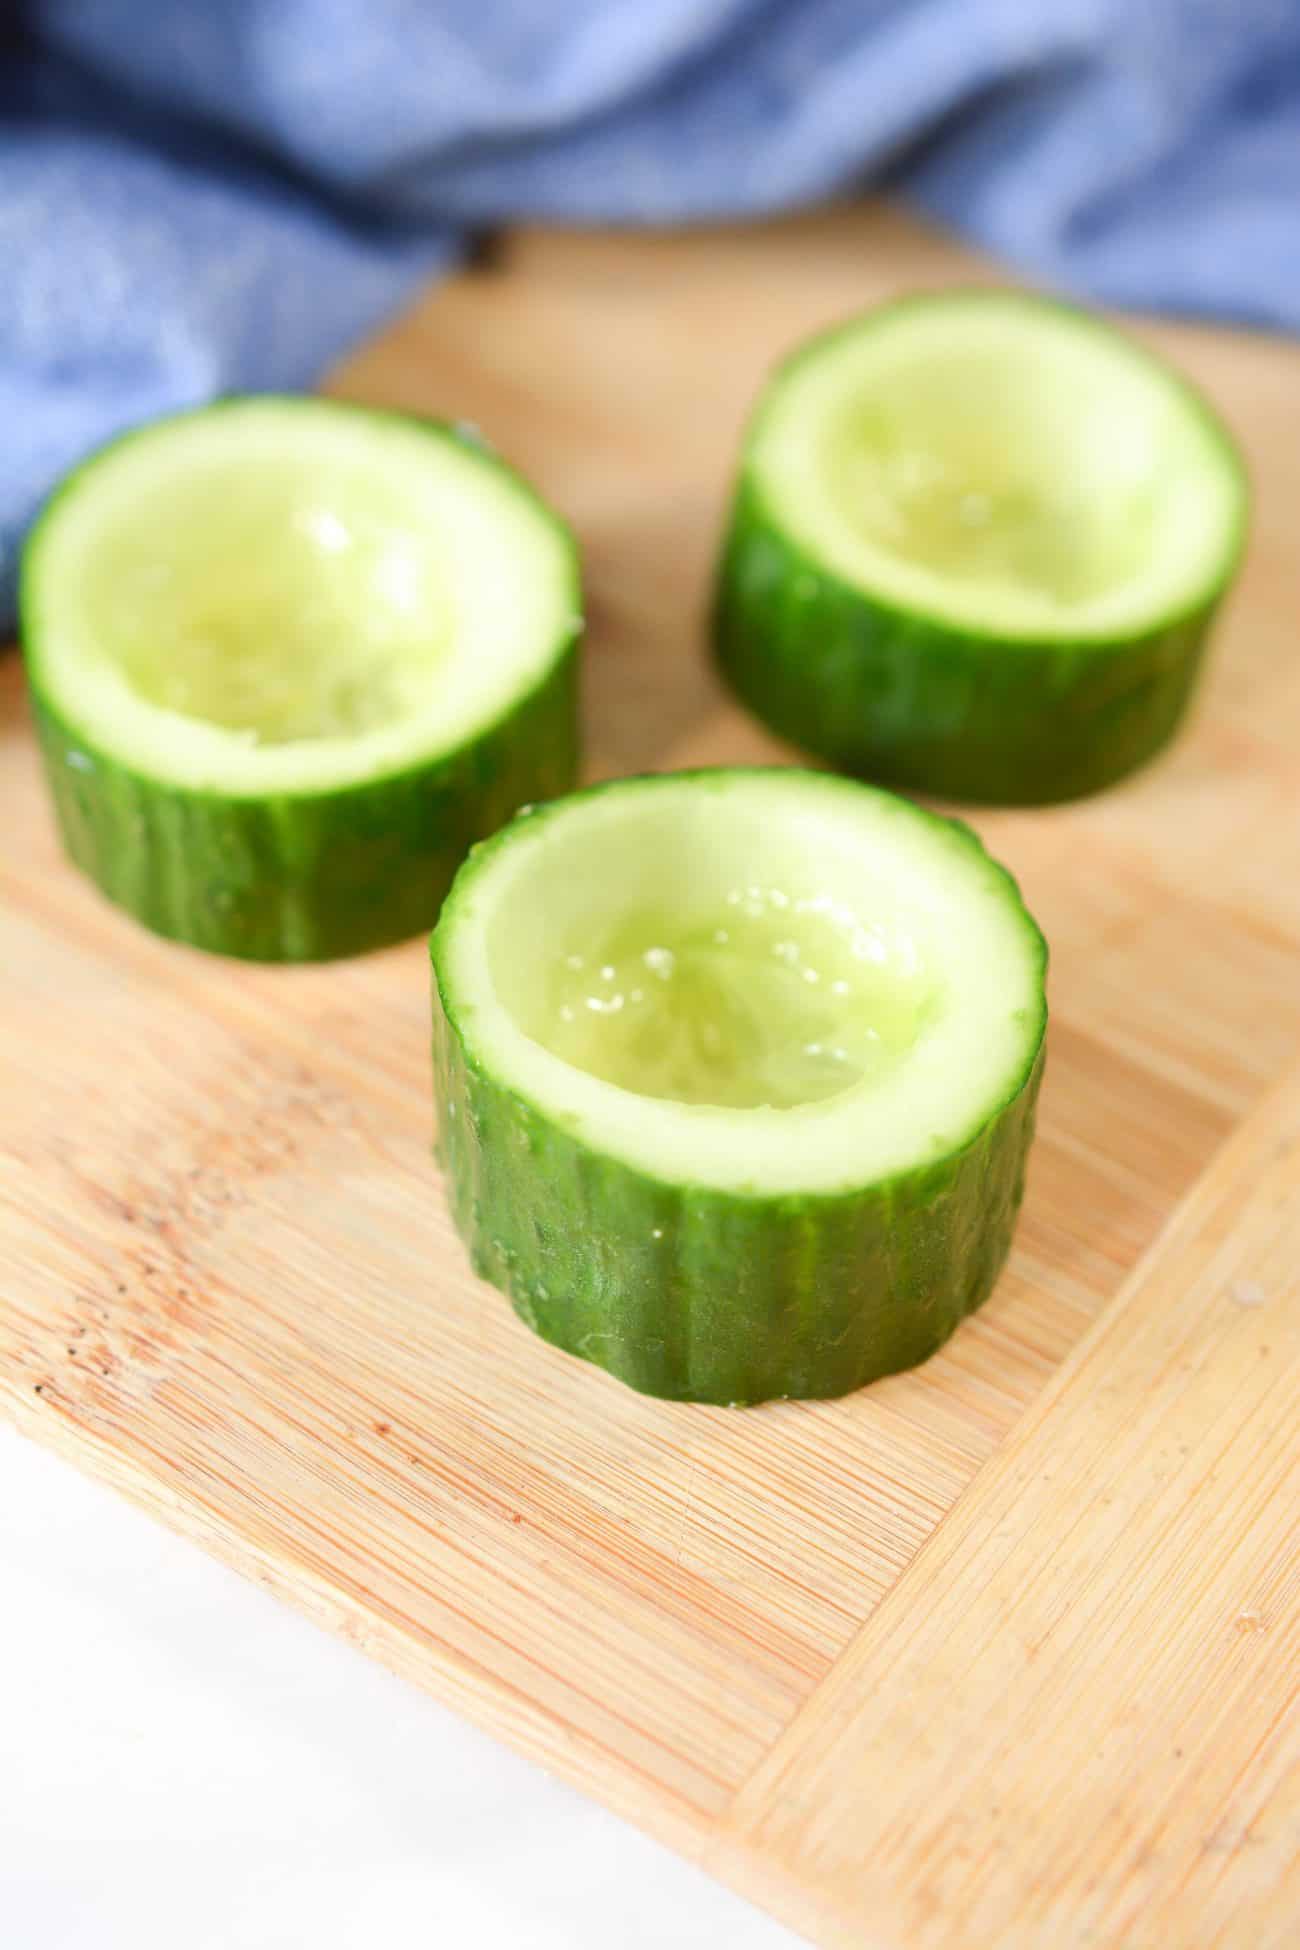 Cut the cucumbers into 1-inch slices